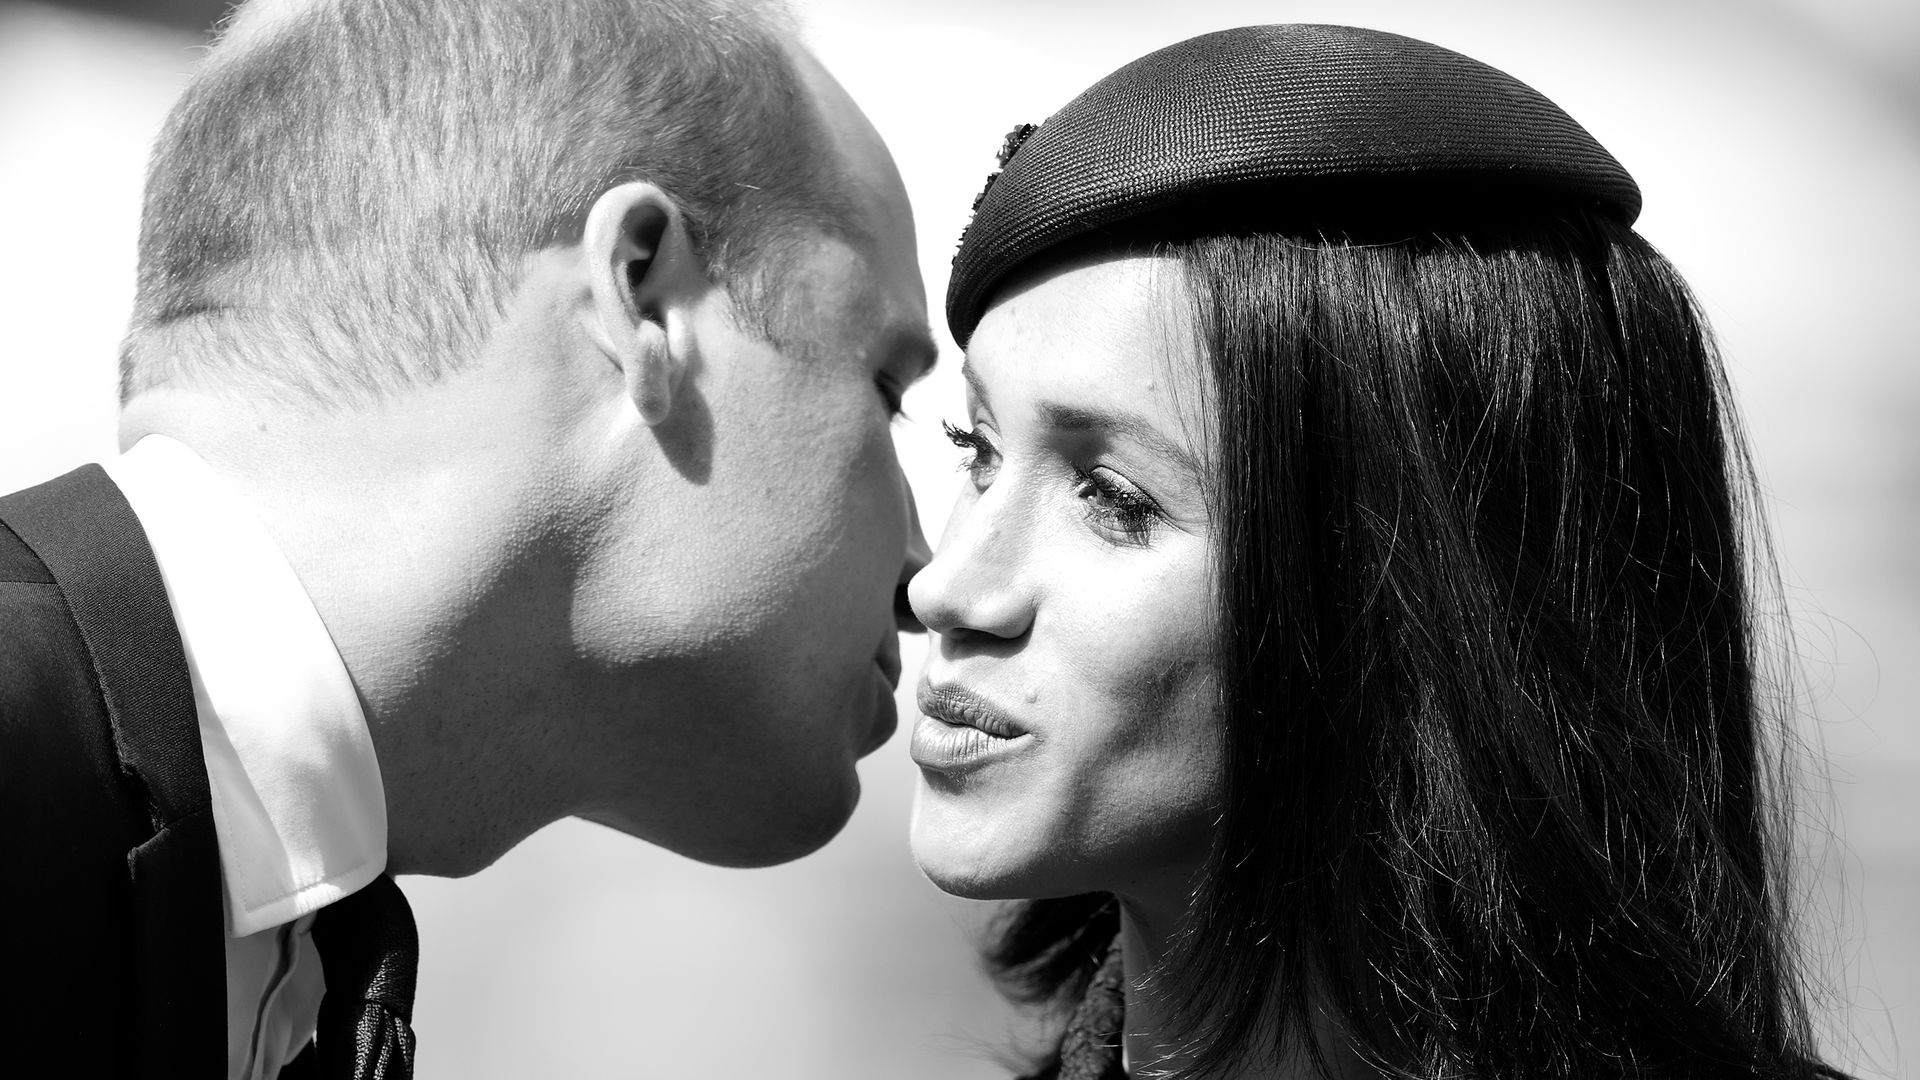 Prince William and Meghan Markle kissing in black and white photo